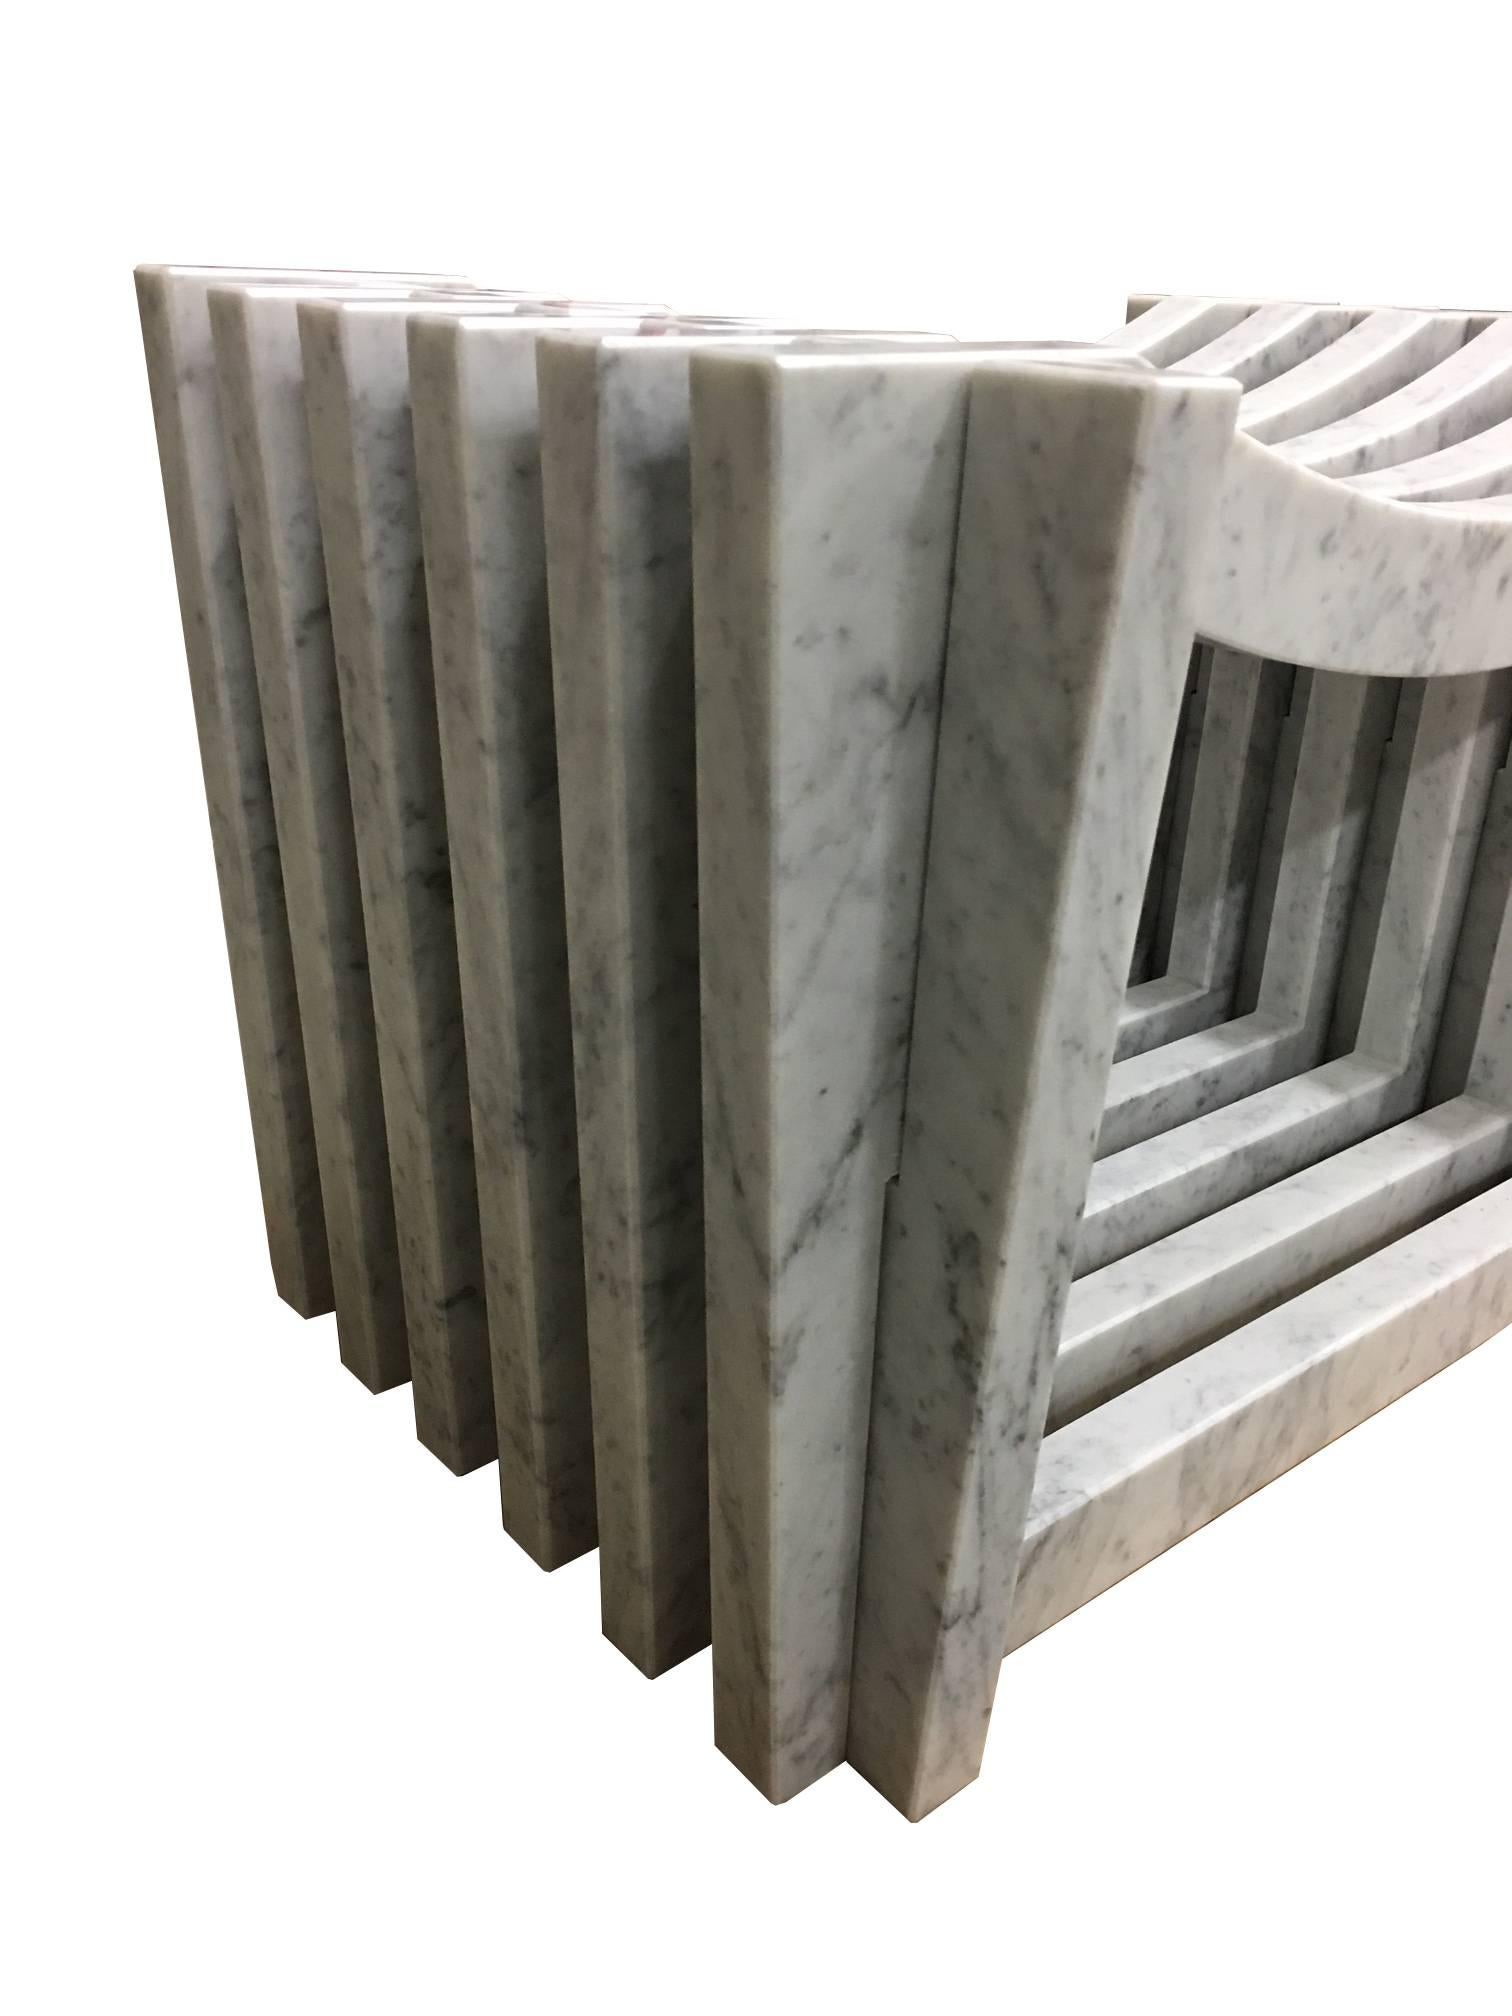 Italian Minimalist White Carrara Marble Benches or Stools by Massimo Mangiardi In Excellent Condition For Sale In New York, NY